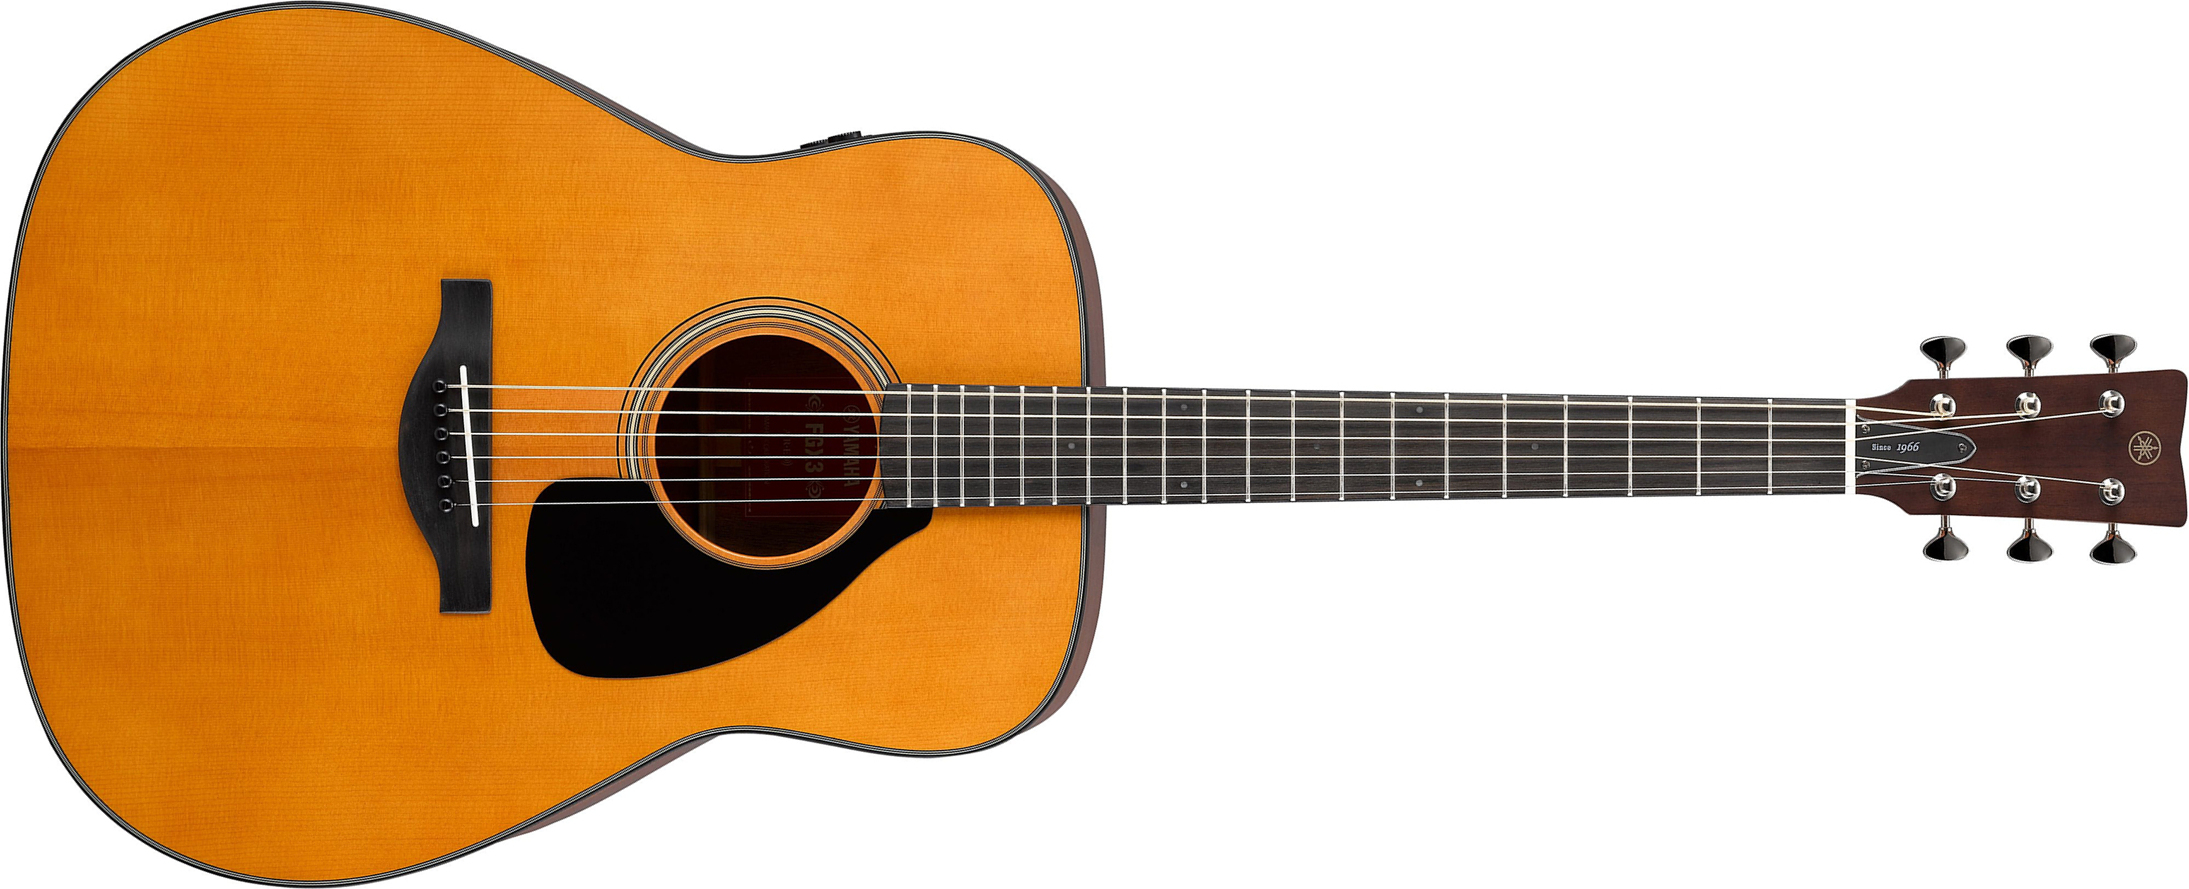 Yamaha Fgx3 Red Label Dreadnought Epicea Palissandre Eb - Heritage Natural - Guitare Acoustique - Main picture